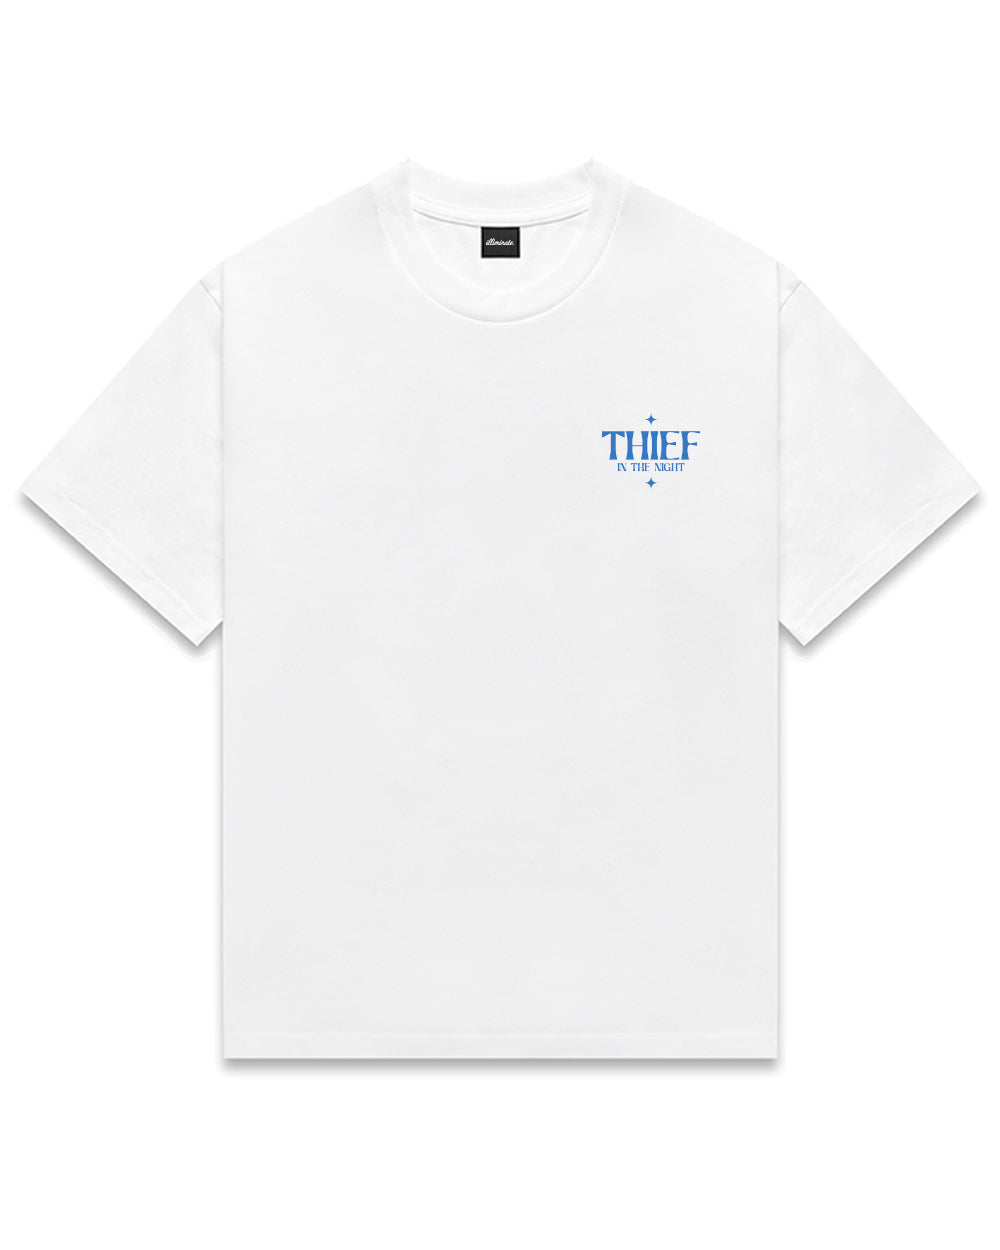 Thief In The Night White Tee